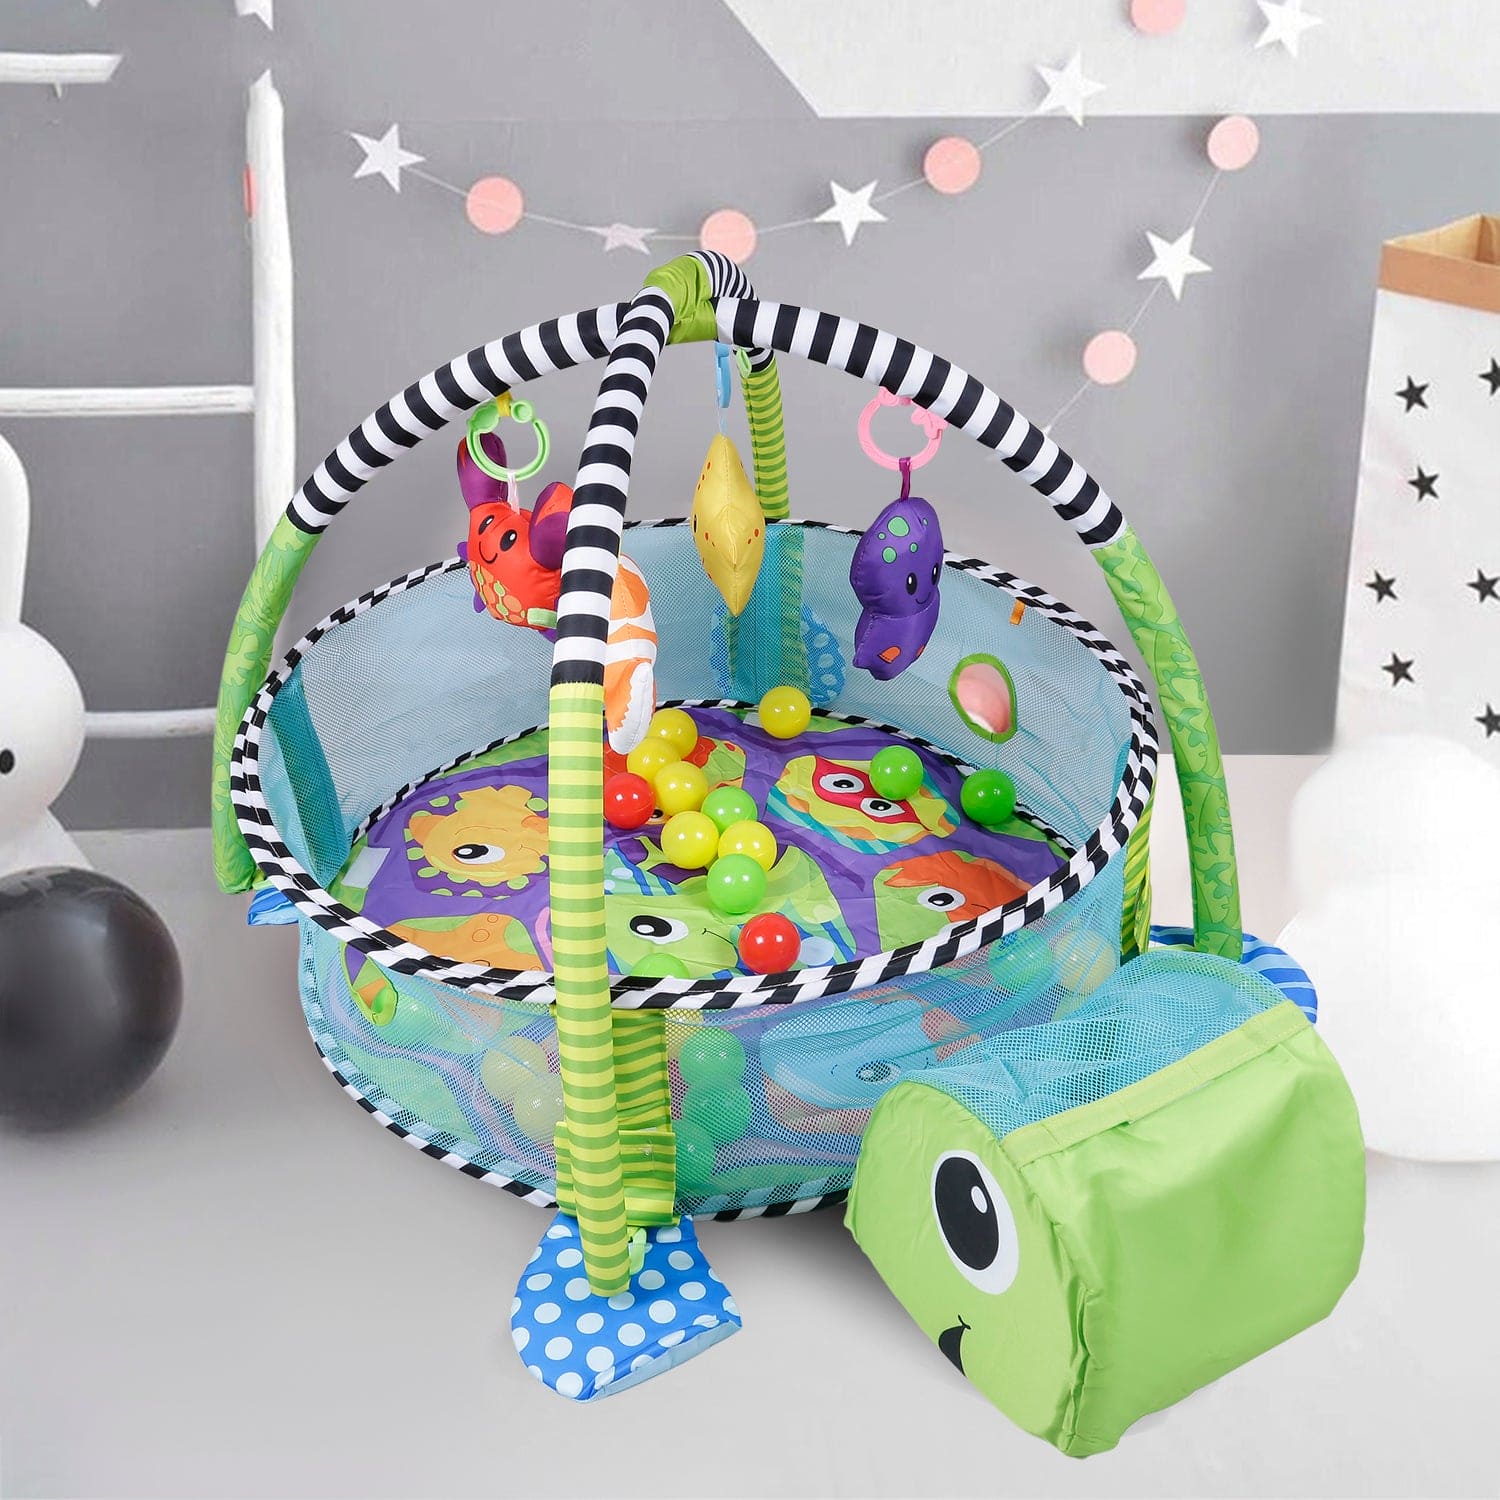 Kids 3 in 1 Turtle Baby Gym Activity Floor Mat, Ball Pit & Toys Baby Play  mat